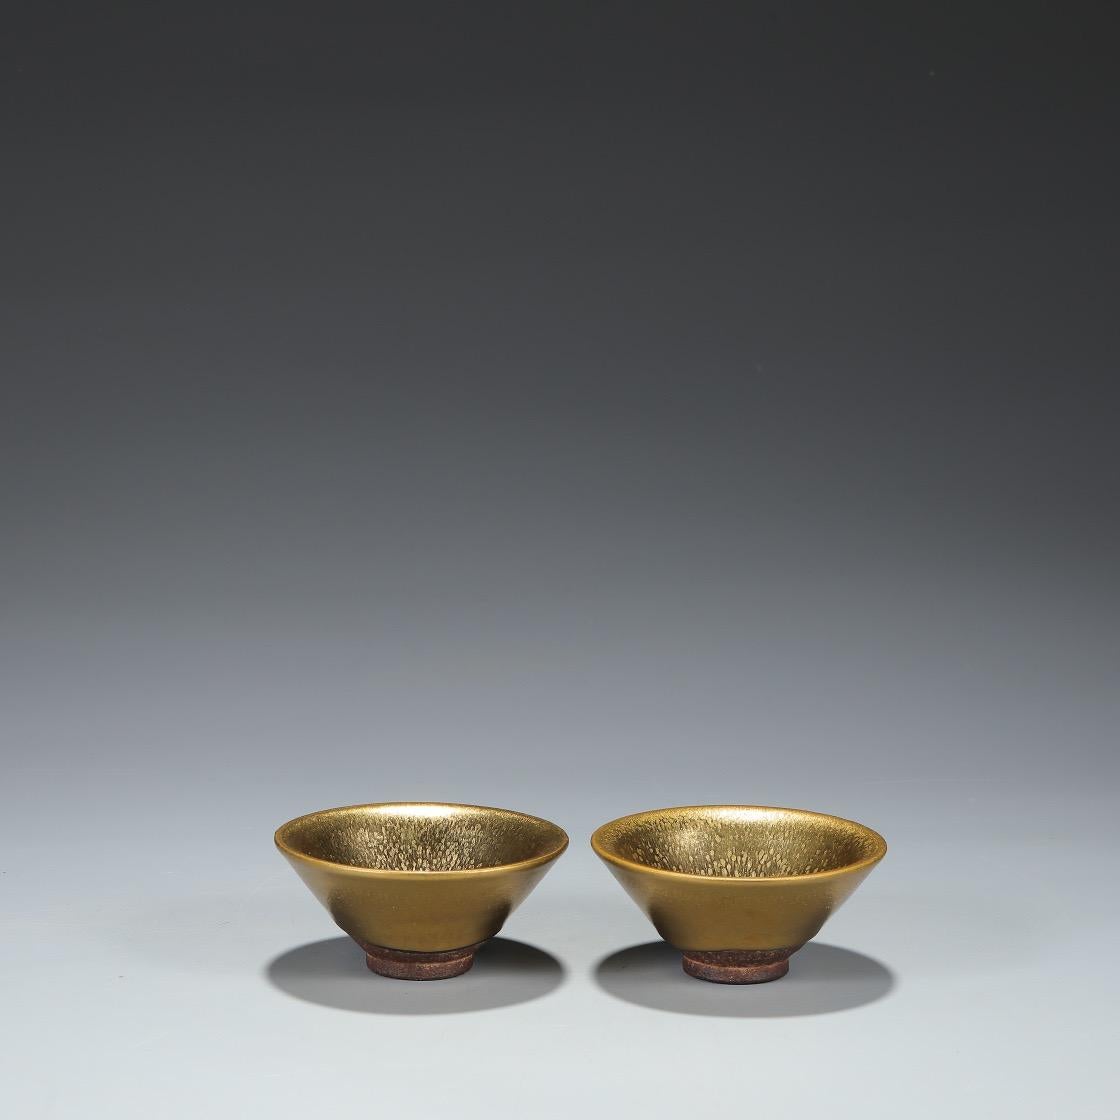 Northern Song Dynasty Jian Kiln Gold Glaze Oil Dripping Bowls Pair In Good Condition For Sale In 景德镇市, CN